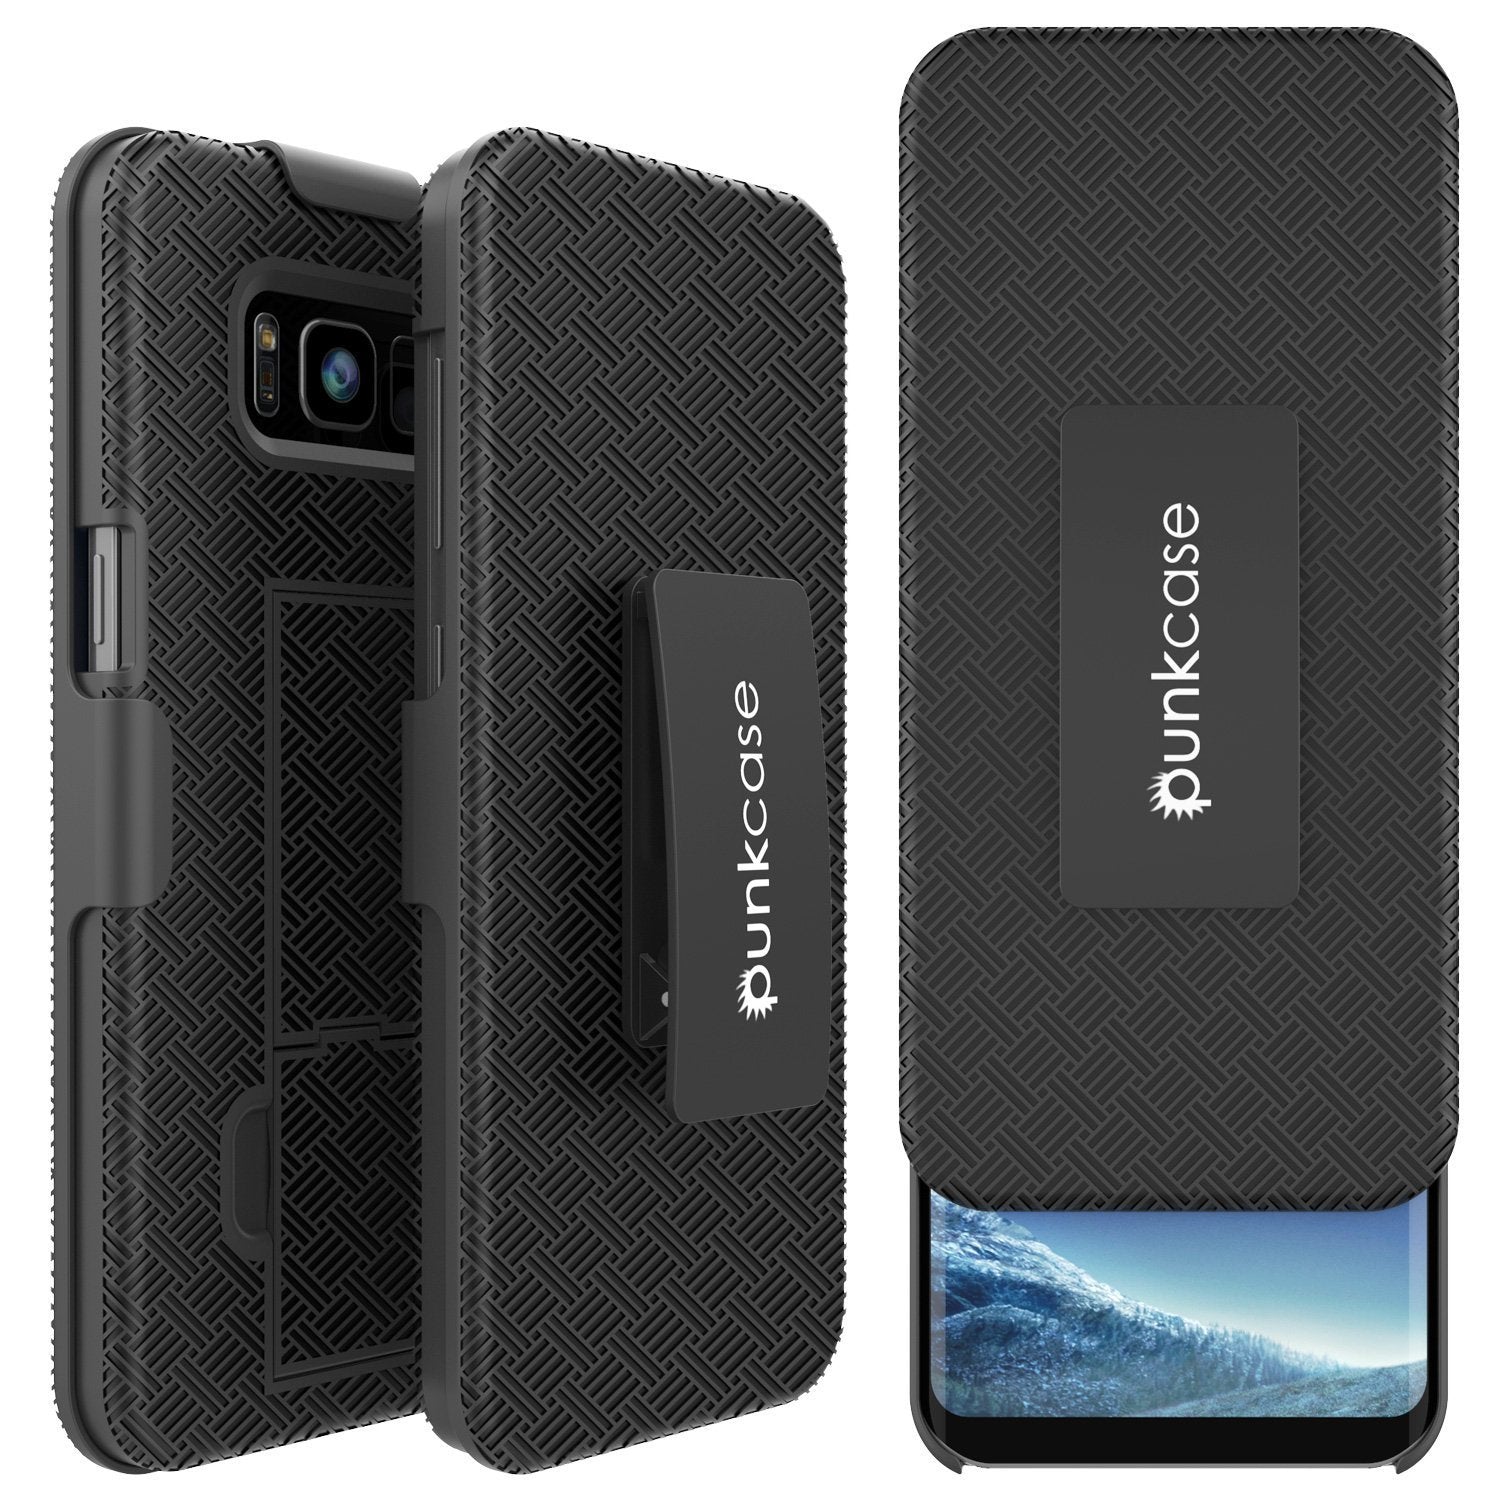 Punkcase Galaxy S8 Case, With PunkShield Glass Screen Protector, Holster Belt Clip [Black]